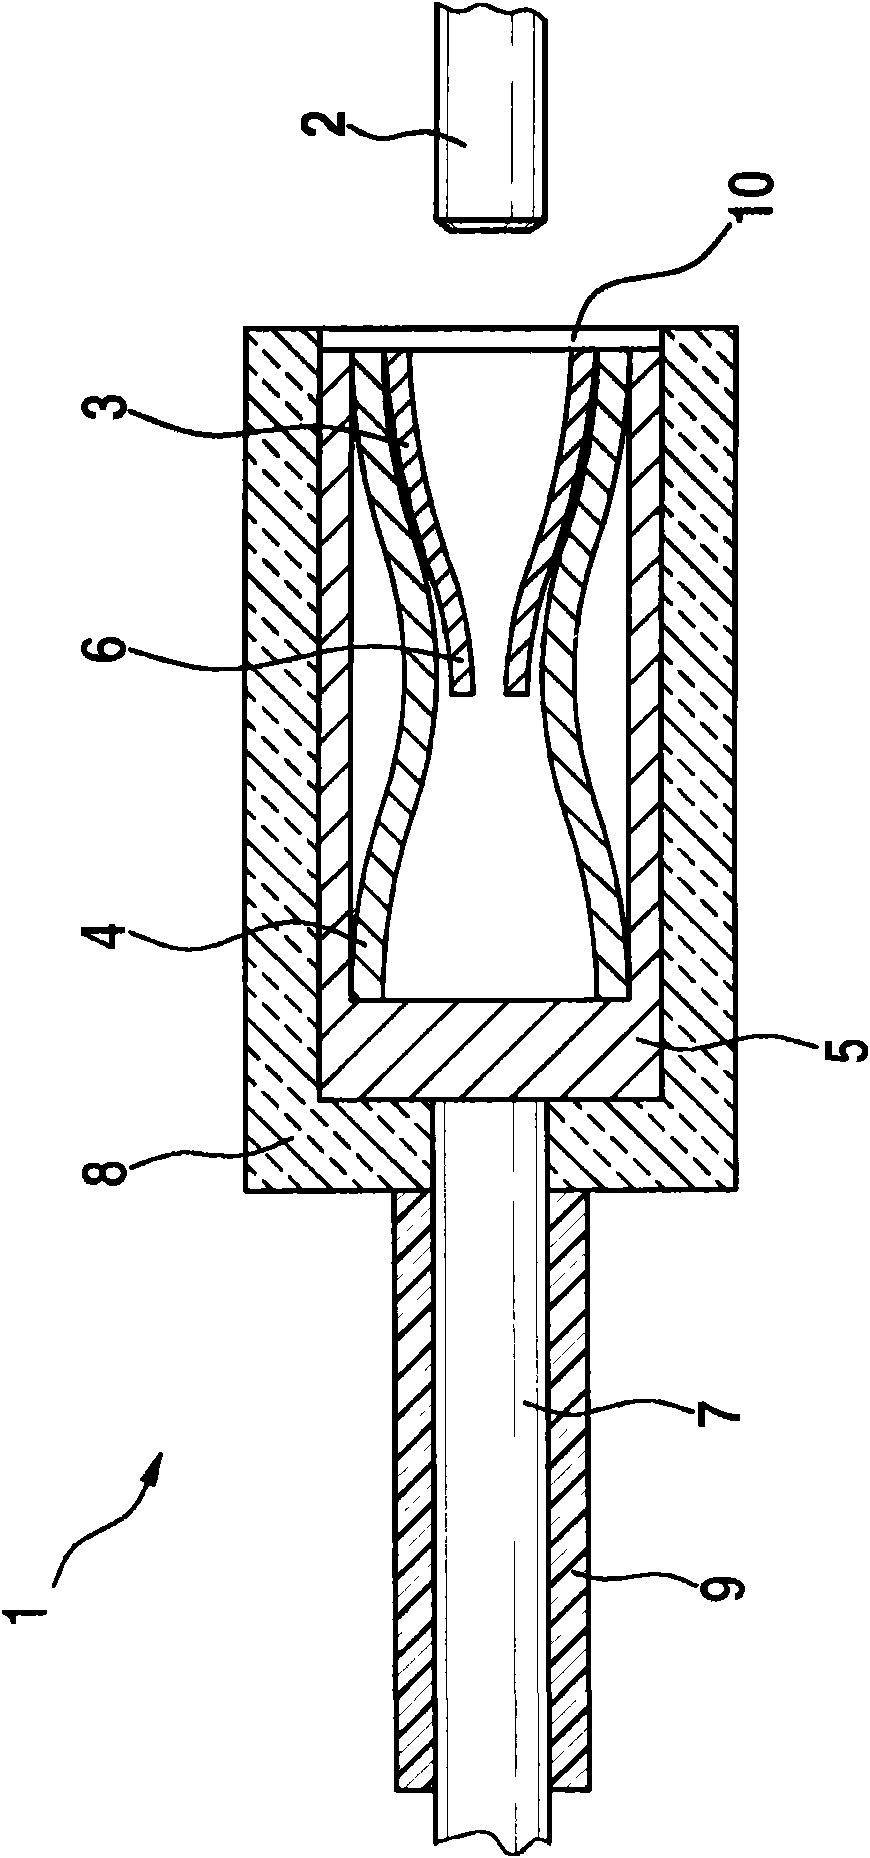 Electrical plug connector as a fuel injector contact for vibration-resistant applications